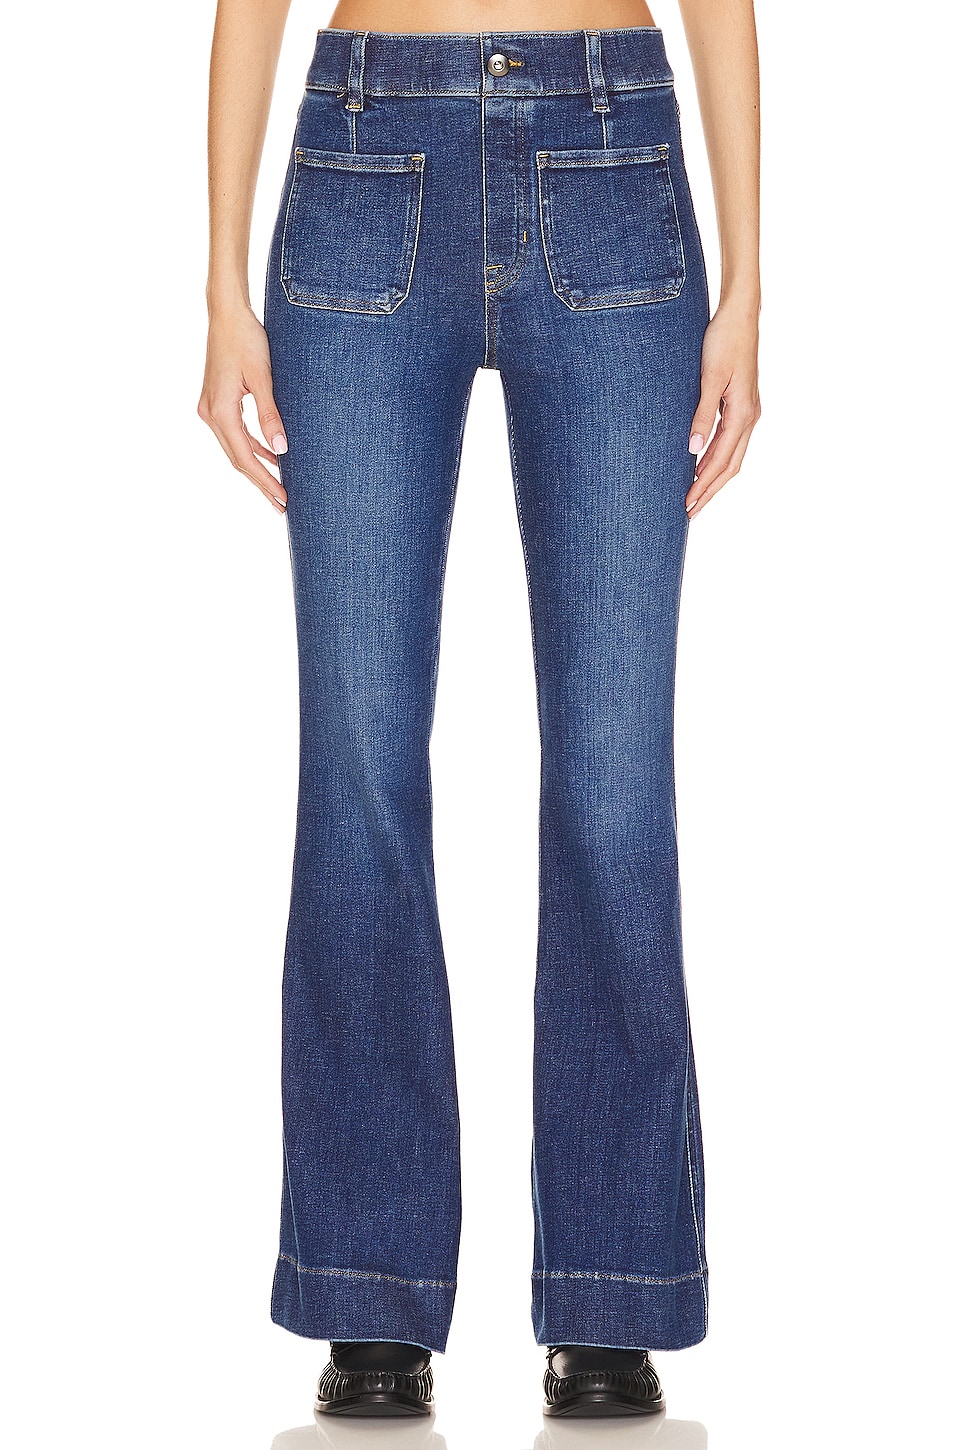 Pia - Low Rise Flared Jeans with 3 Band